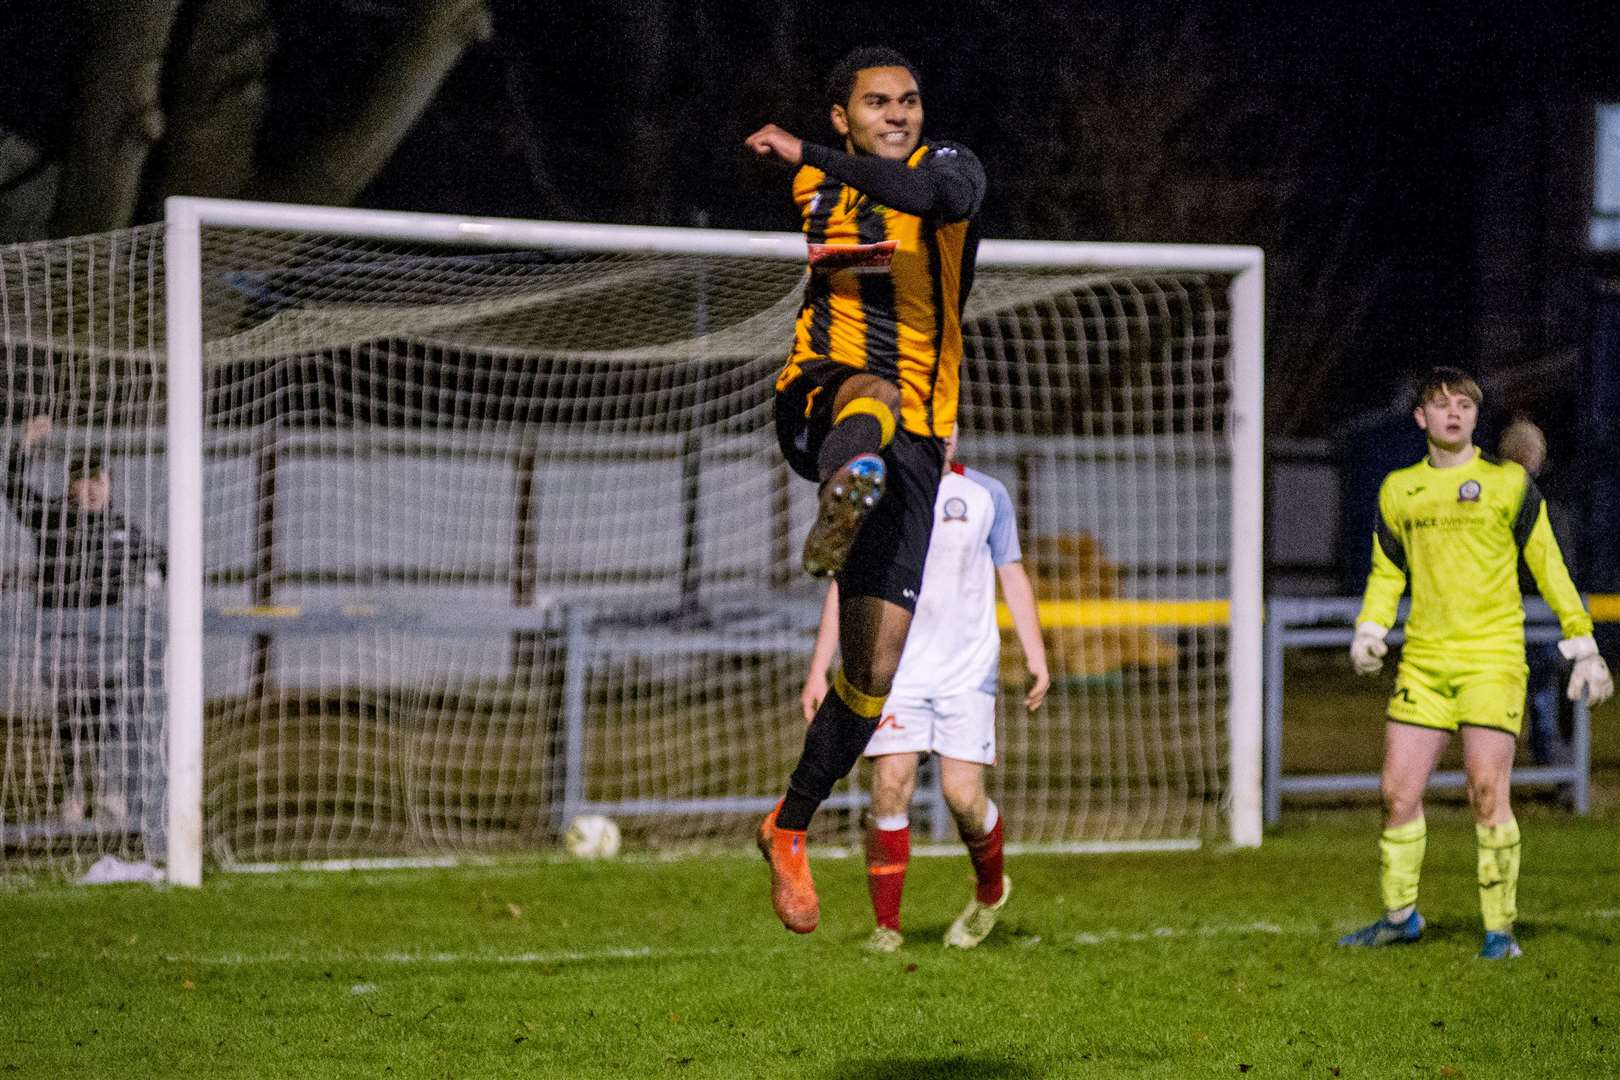 Huntly forward Robbie Foster scores on his debut for the Gordon club. ..Huntly FC (3) vs Turriff United FC (0) - Christie Park, Huntly 27/12/2021 - Highland Football League...Picture: Daniel Forsyth..